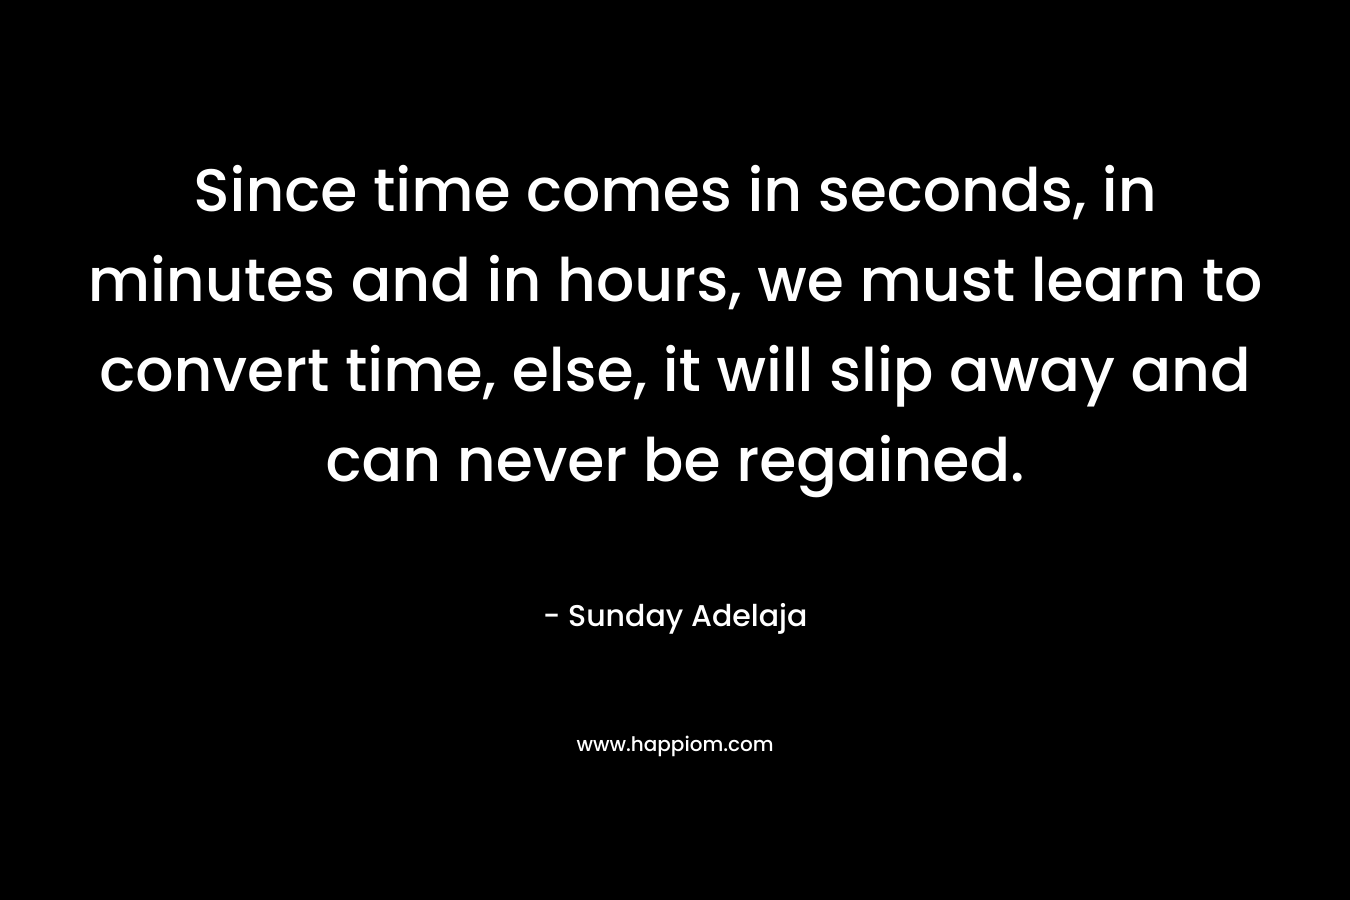 Since time comes in seconds, in minutes and in hours, we must learn to convert time, else, it will slip away and can never be regained.